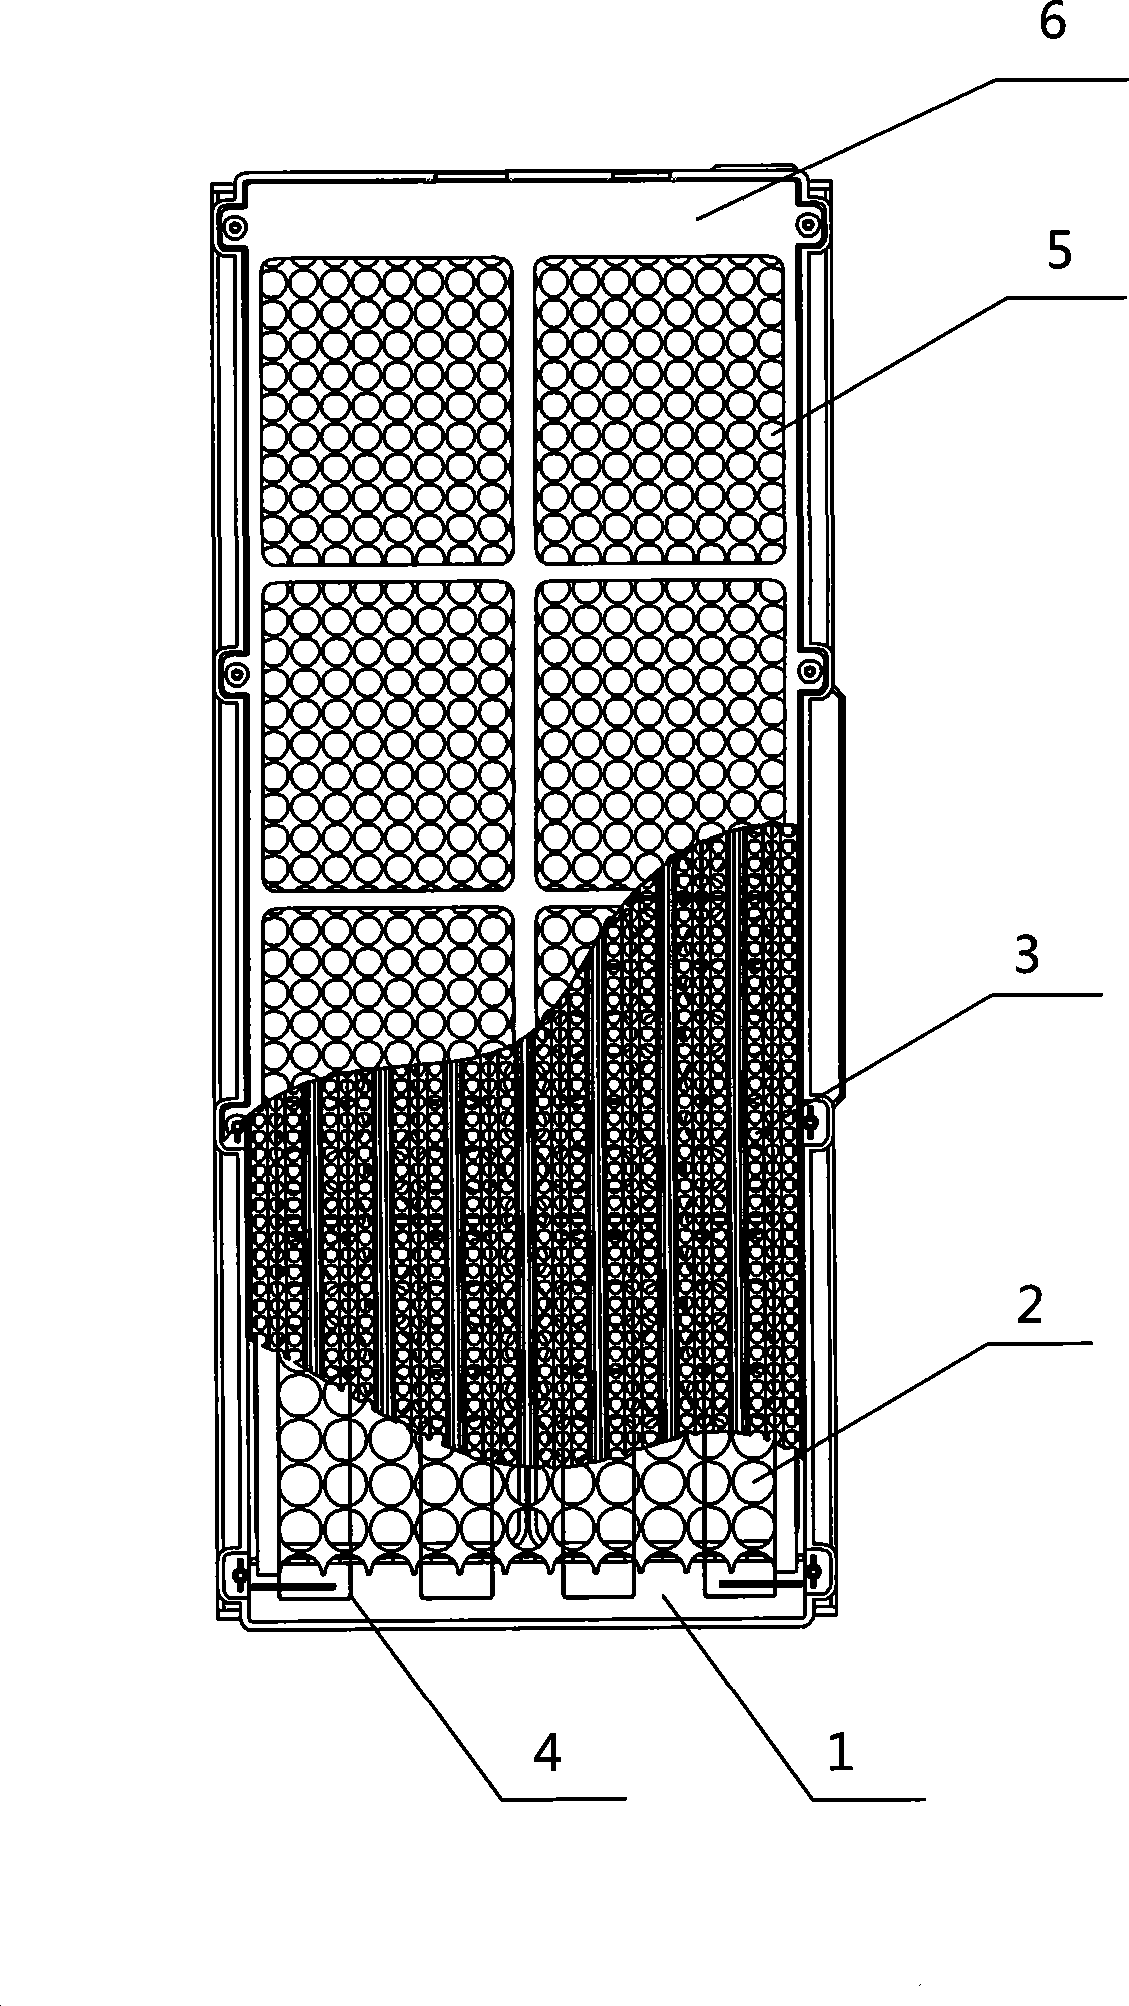 Electrostatic dust collector for air purification